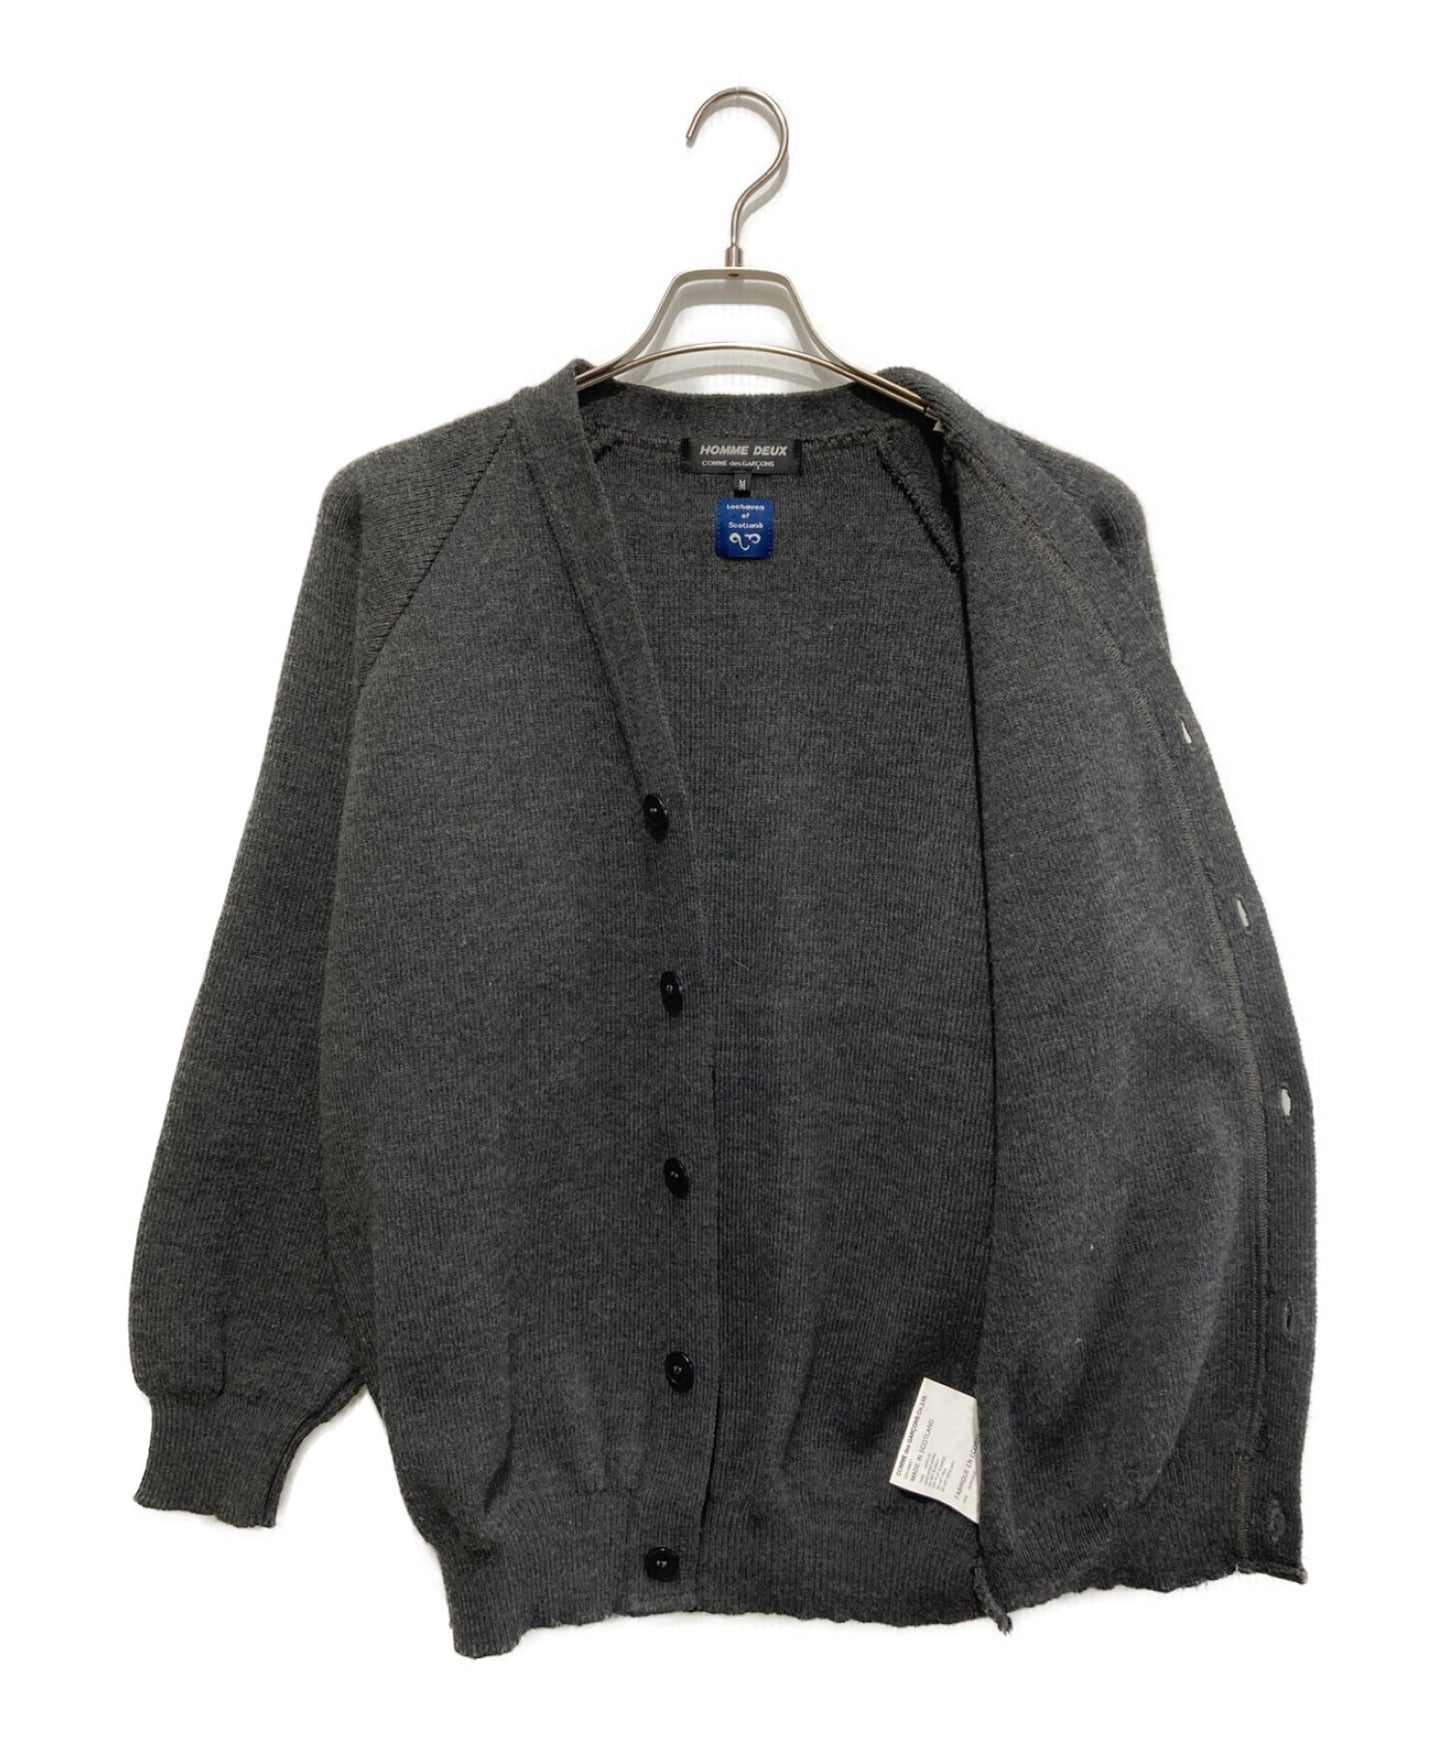 [Pre-owned] COMME des GARCONS HOMME DEUX V-Neck Knit Cardigan / Knitwear / Sweater DH-N501